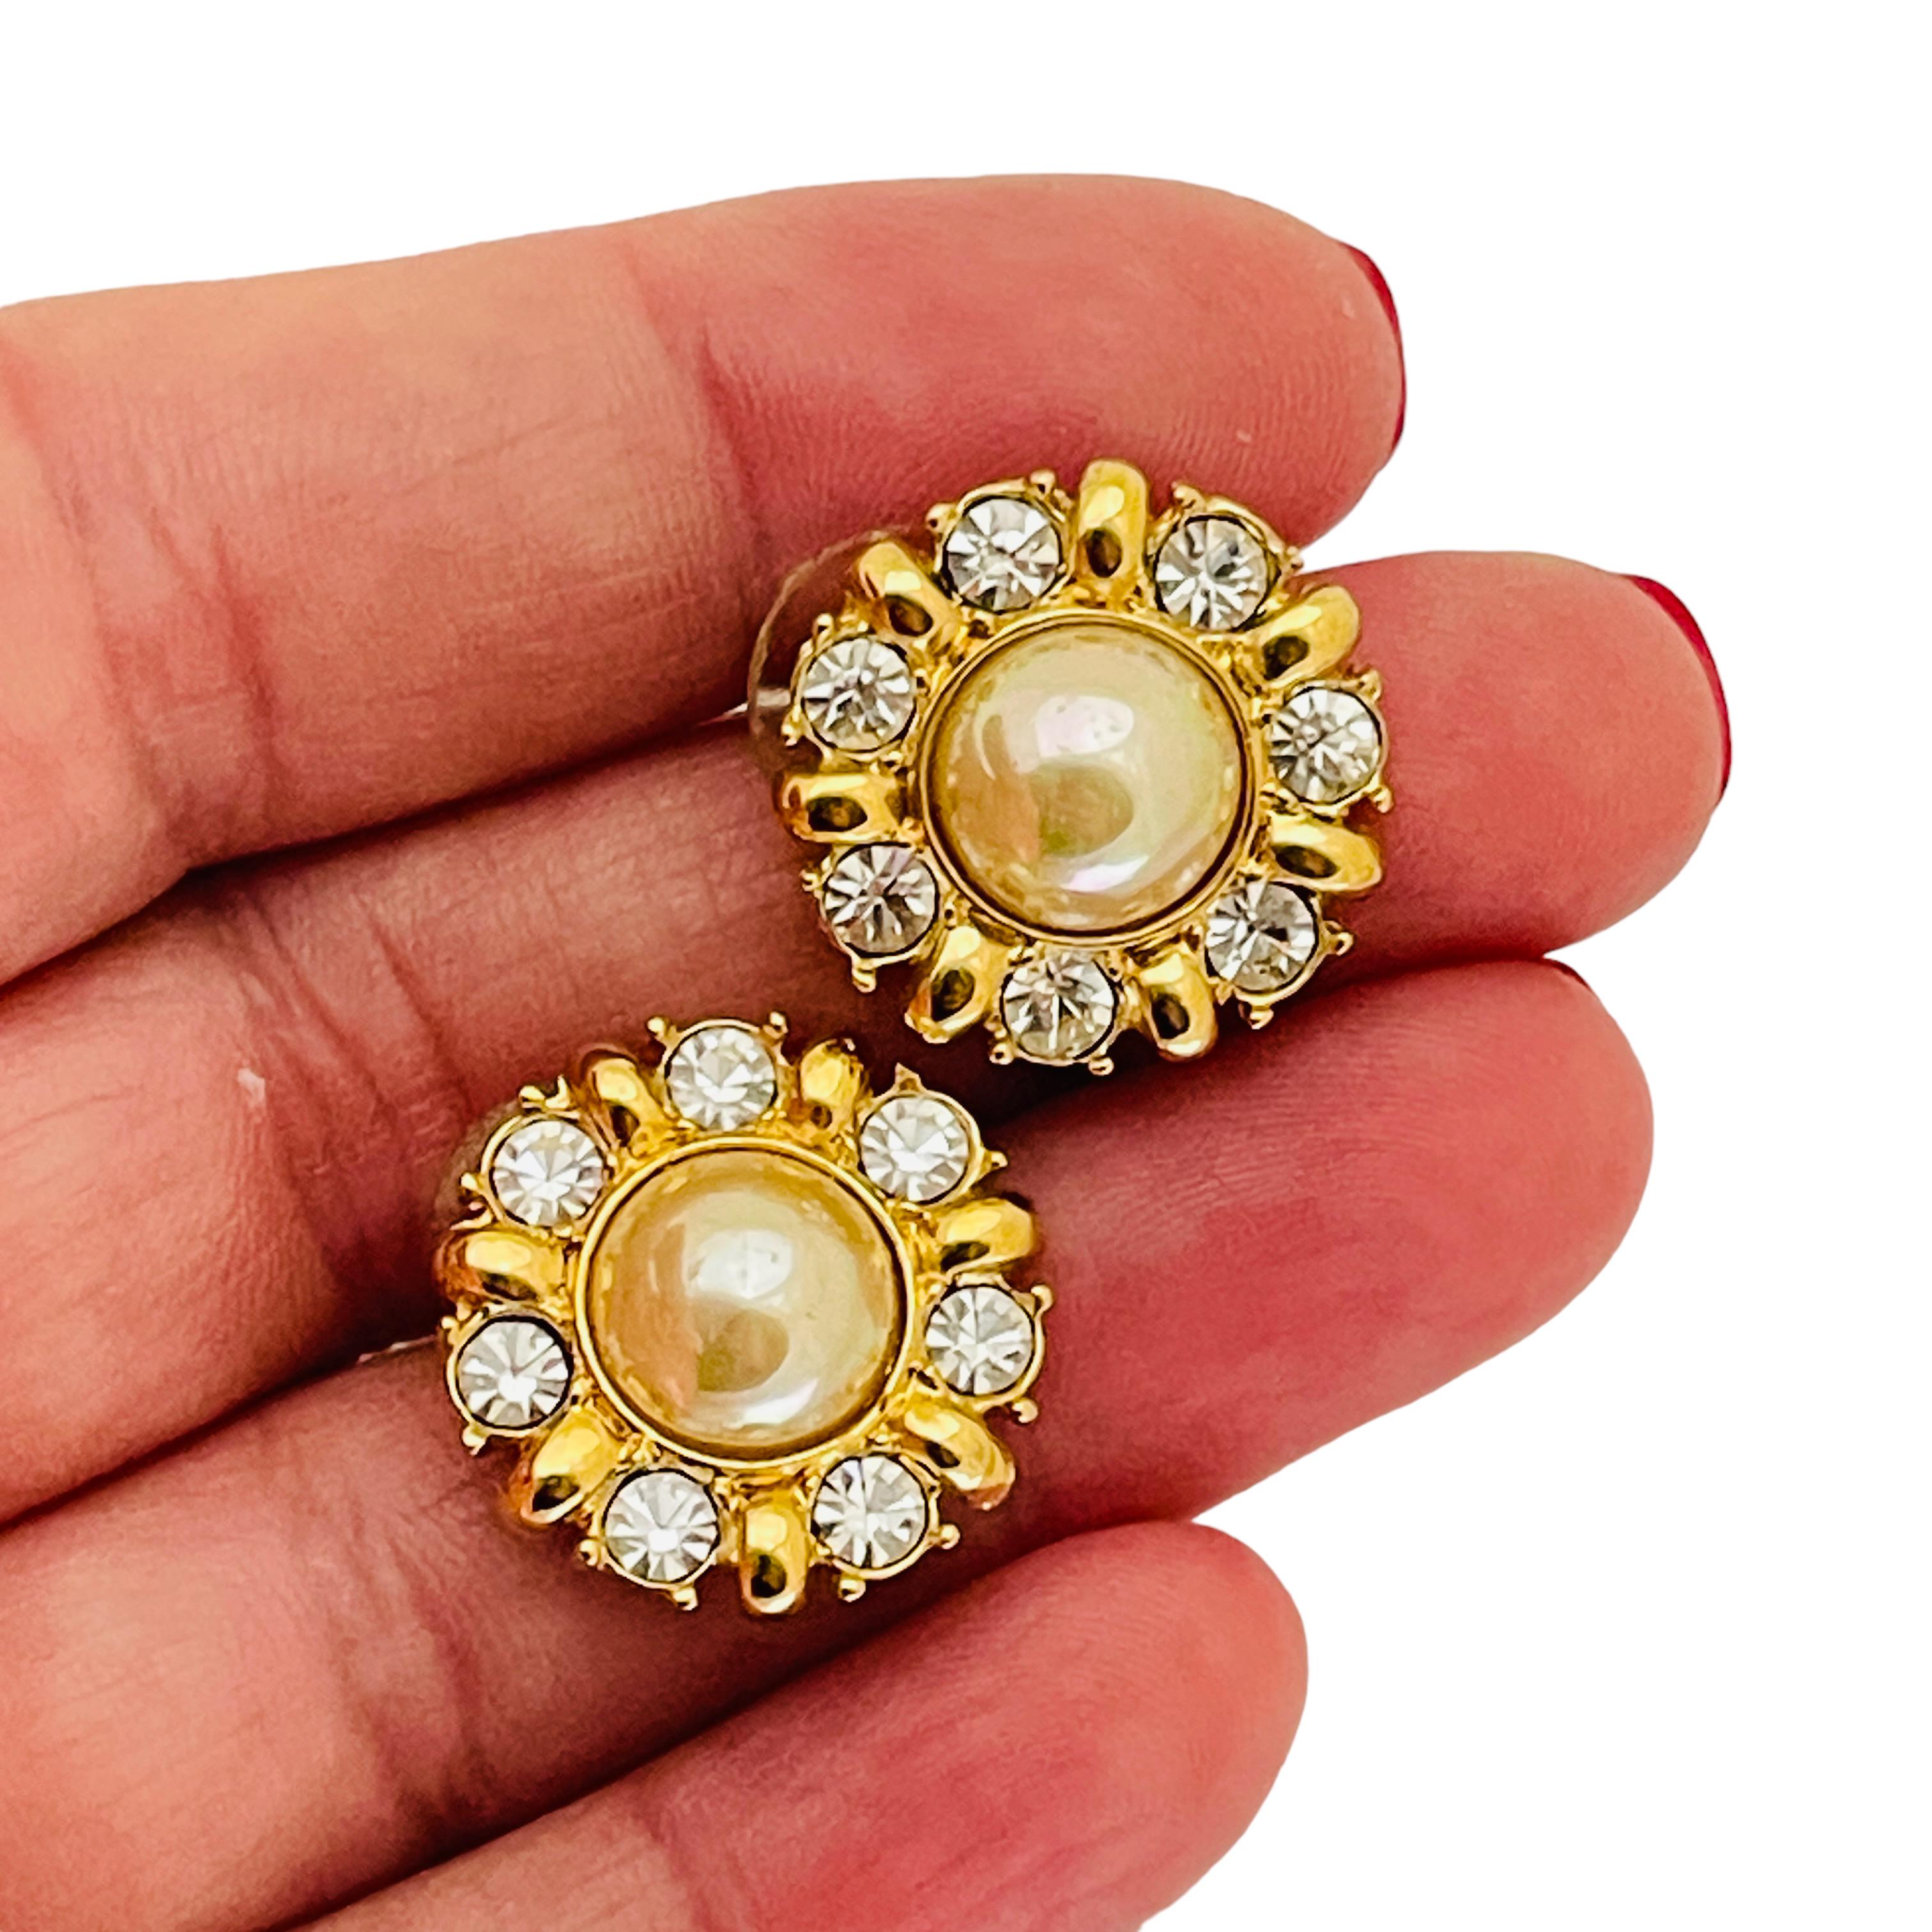 Vintage gold pearl crystal pierced 80’s earrings   In Excellent Condition For Sale In Palos Hills, IL